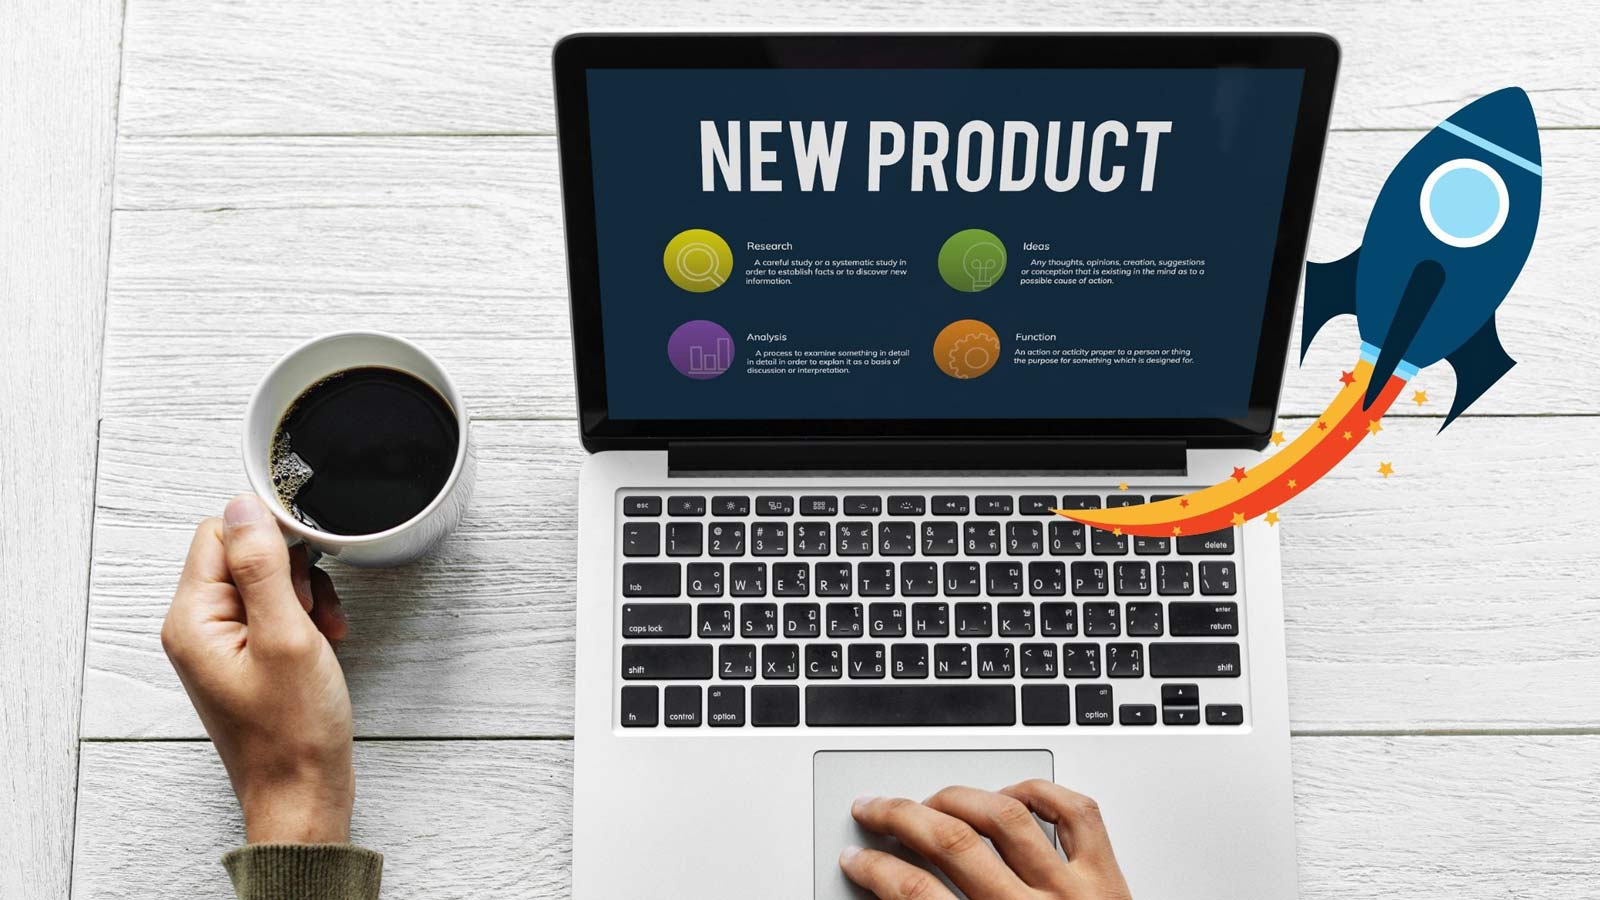 Marketing Strategies To Launch A New Product